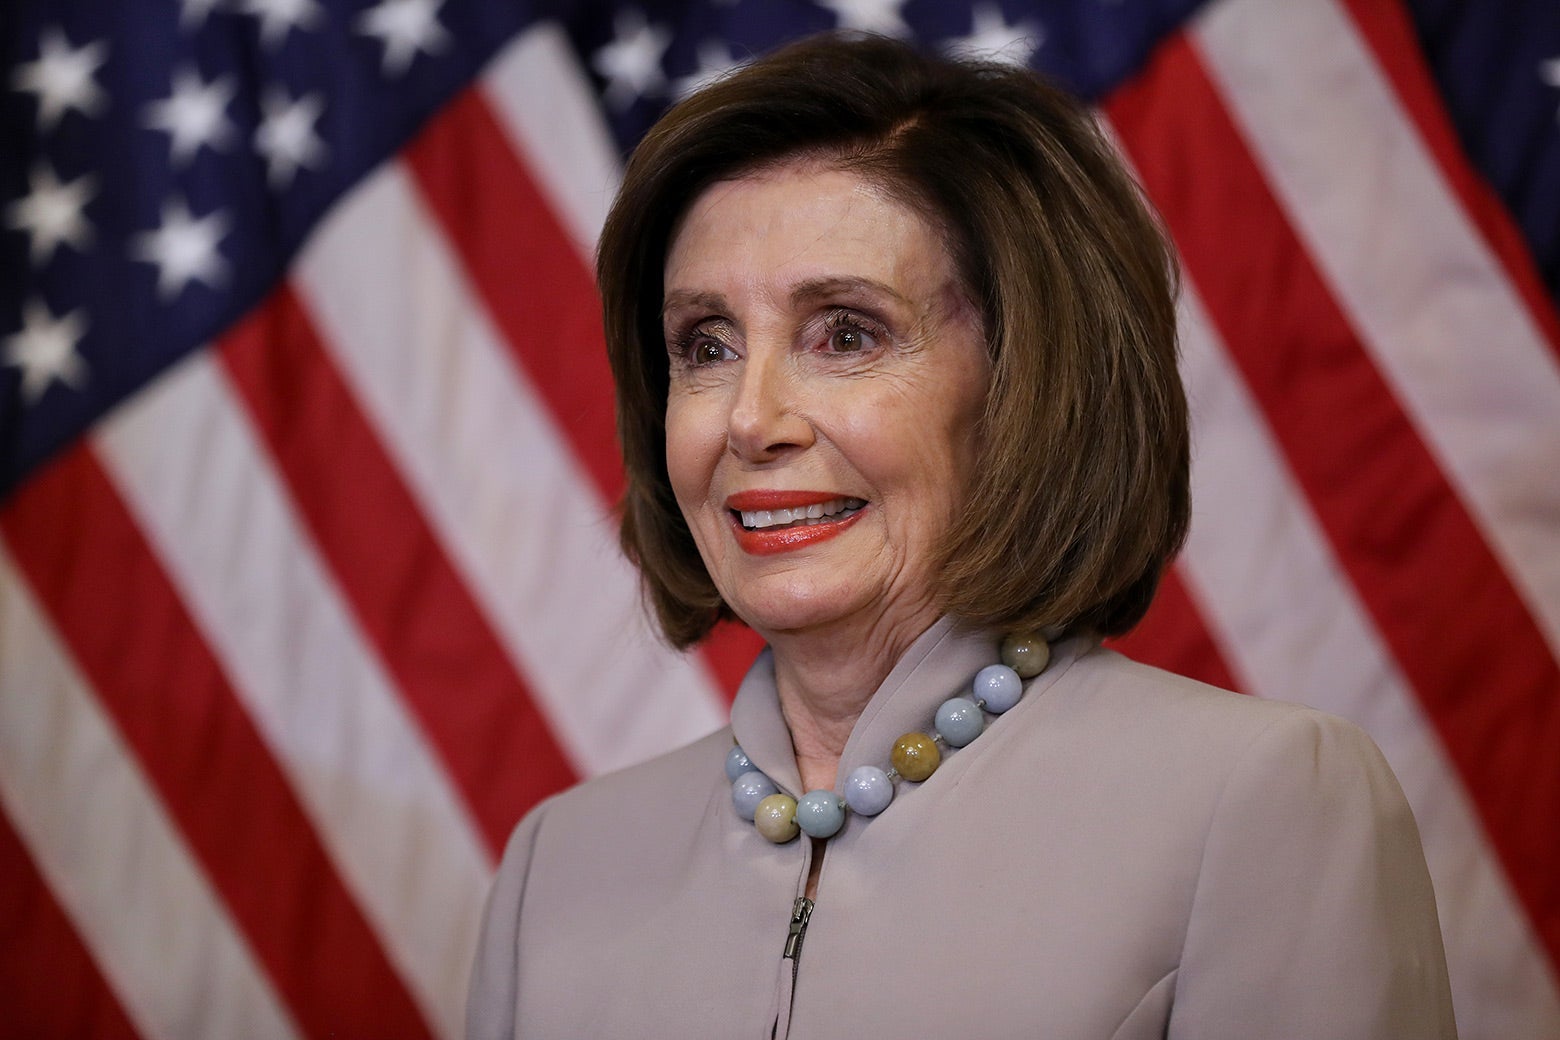 Nancy Pelosi stands in front of an American flag.